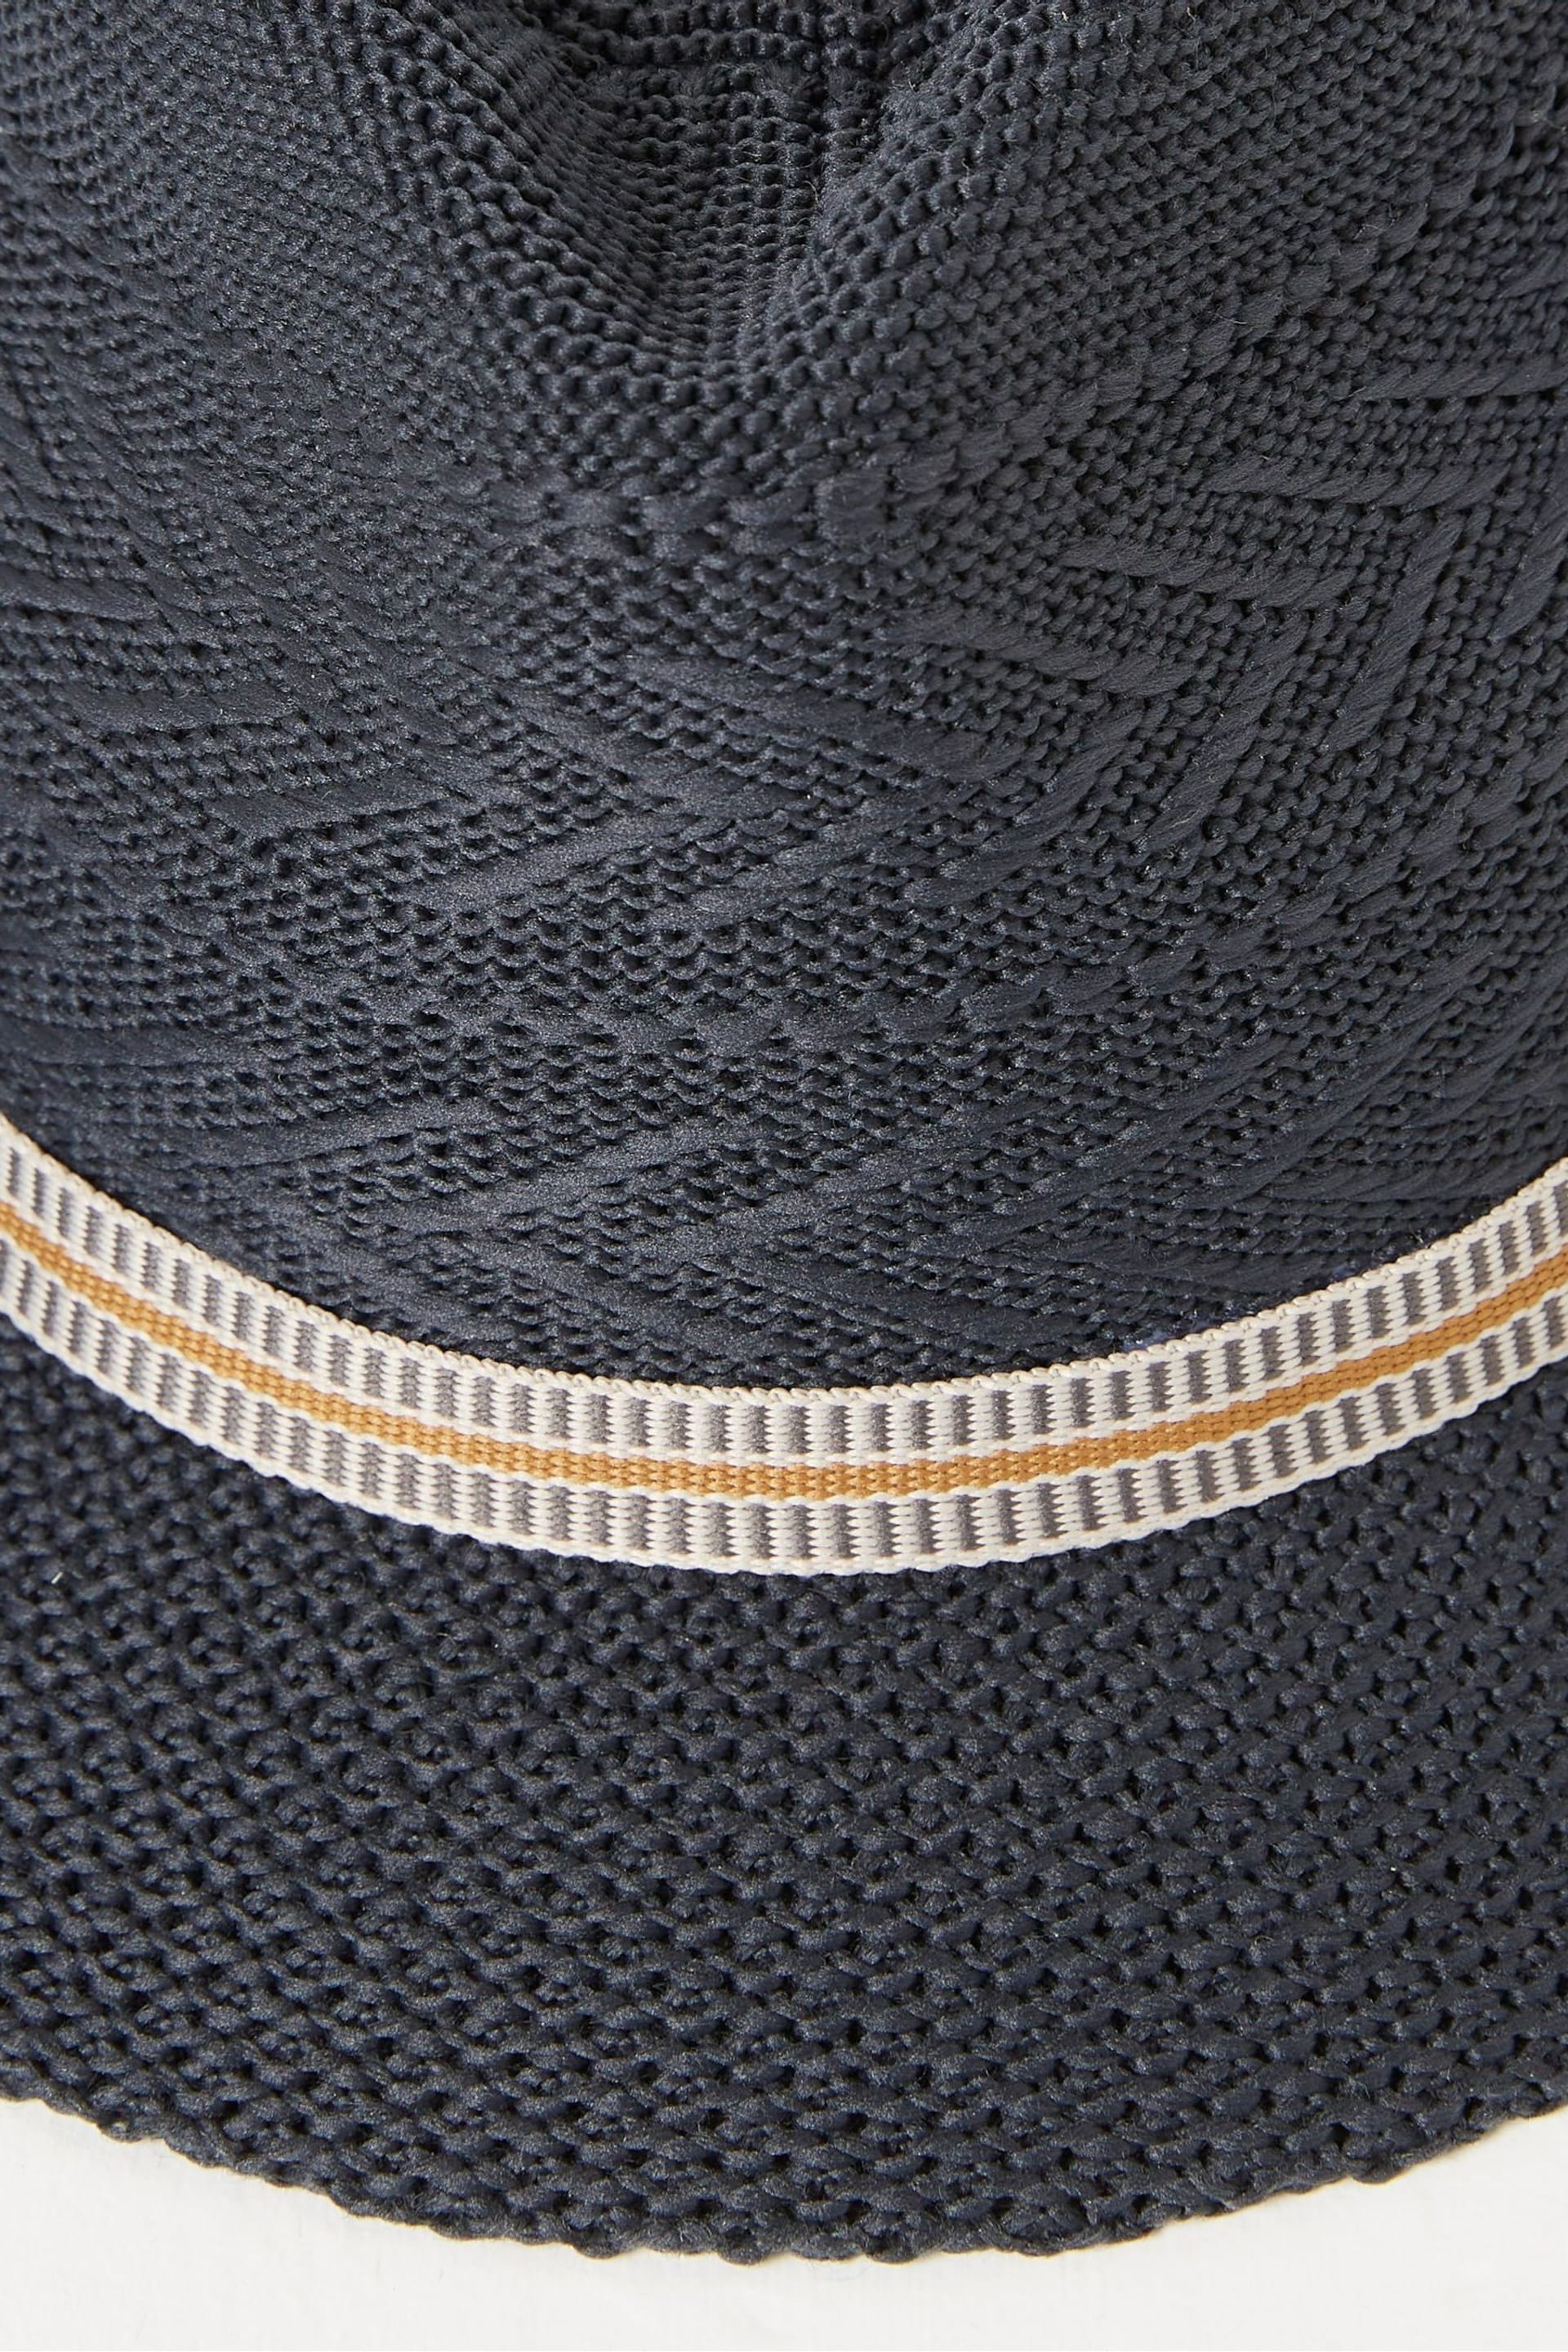 FatFace Black Trilby Hat - Image 2 of 2